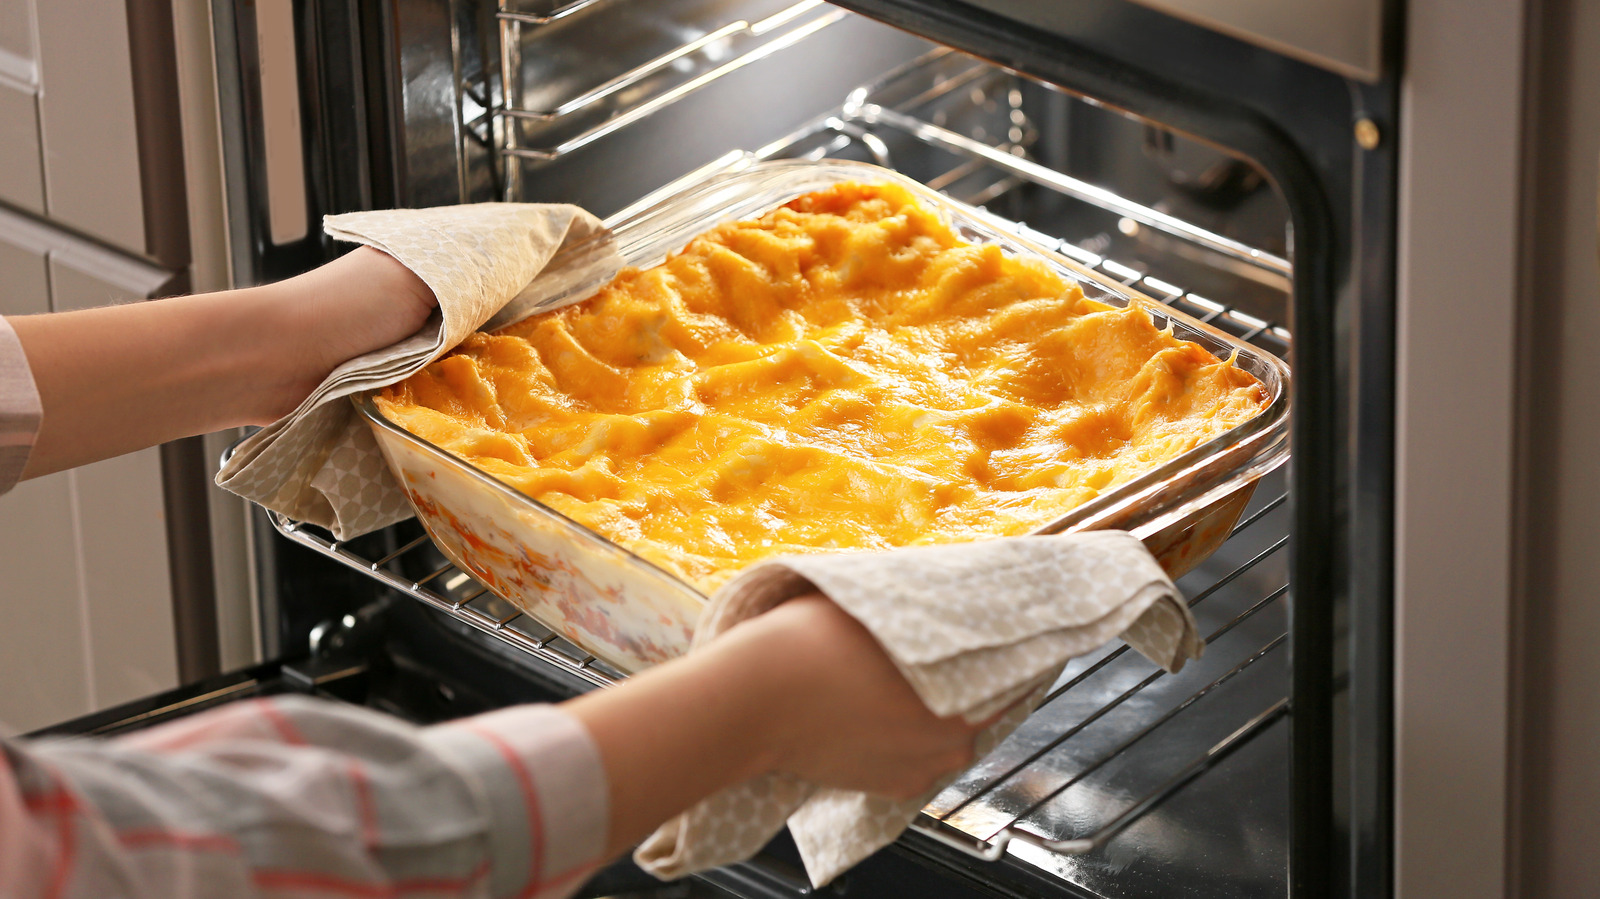 The Absolute Best Temperature Range For Cooking Casseroles